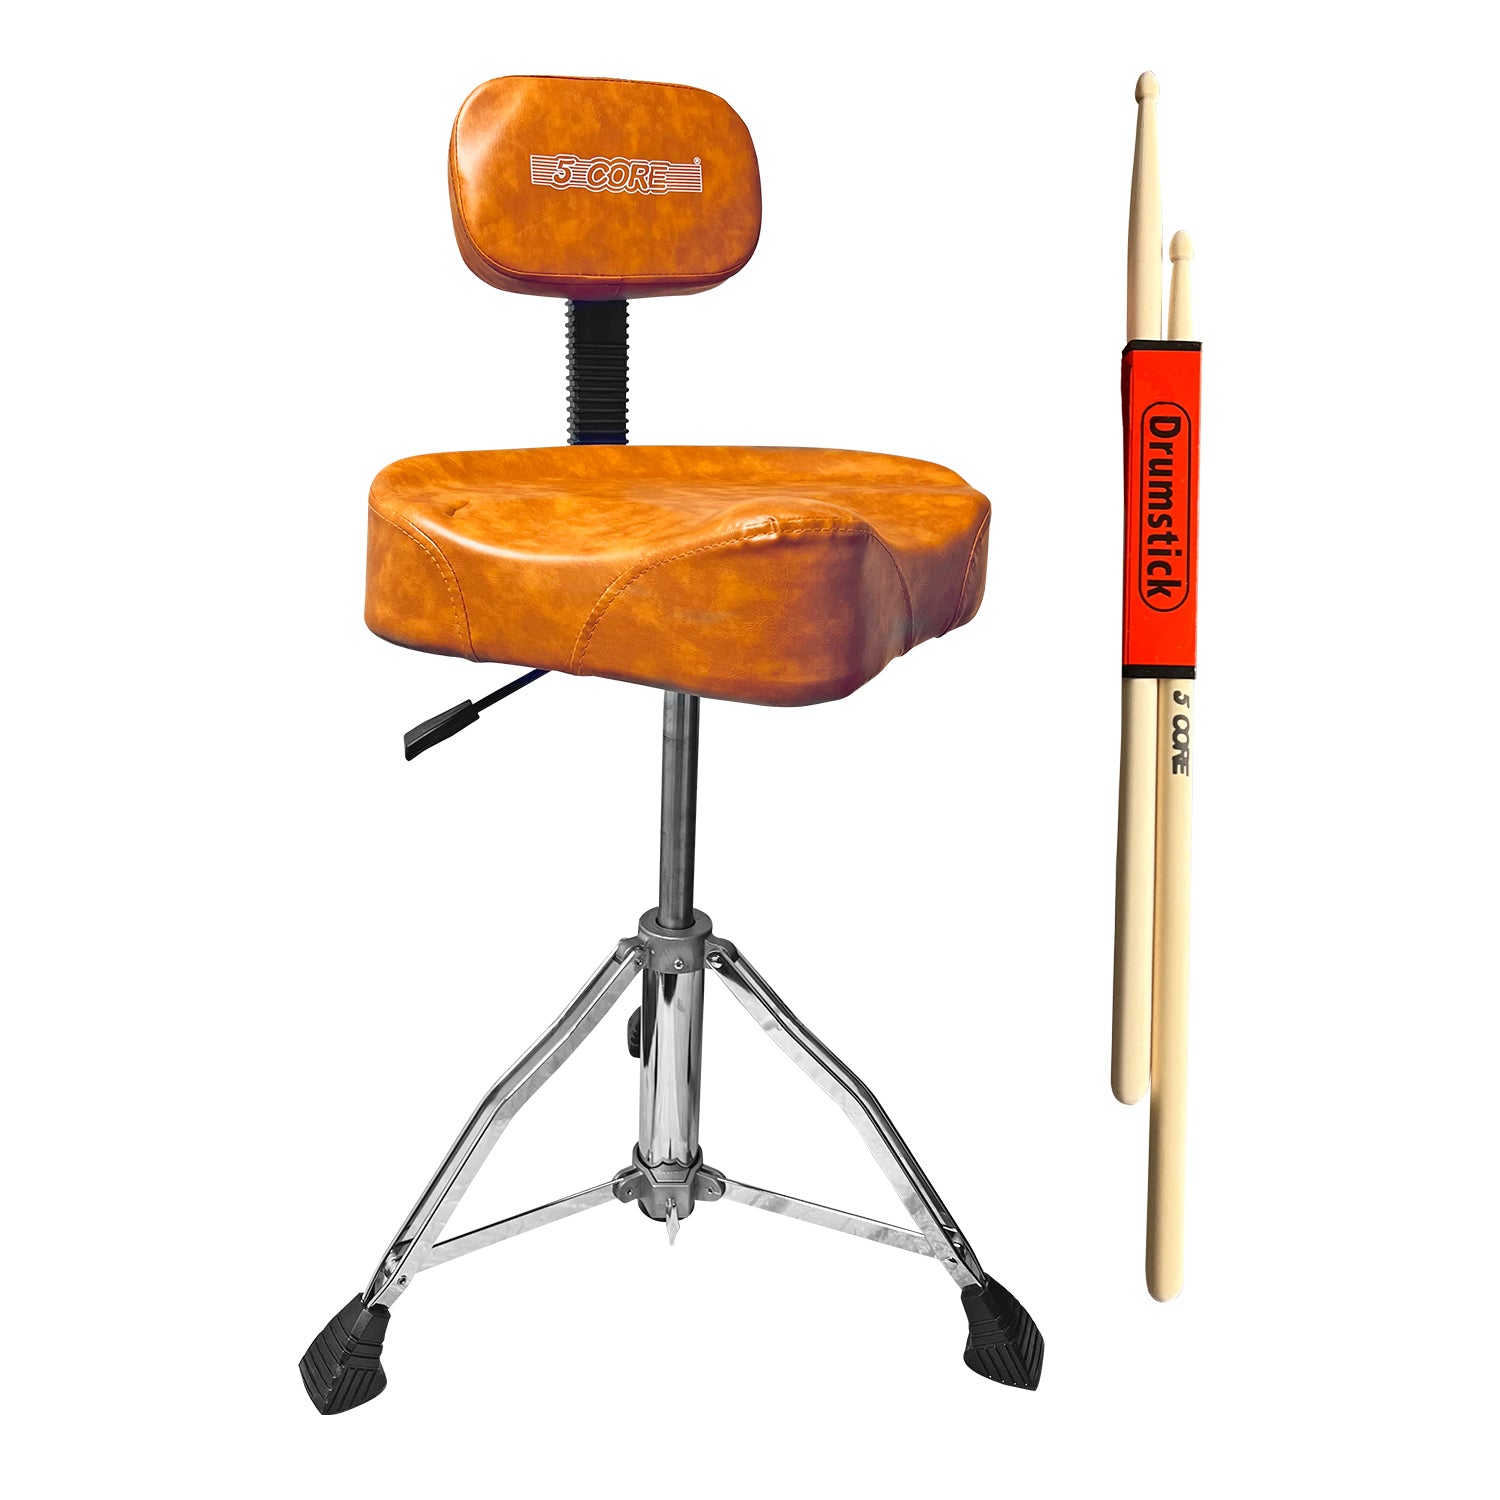 5 Core Drum Throne with Backrest Hydraulic Guitar Stool Adjustable Stool Drummer Chair Heavy Duty Seat